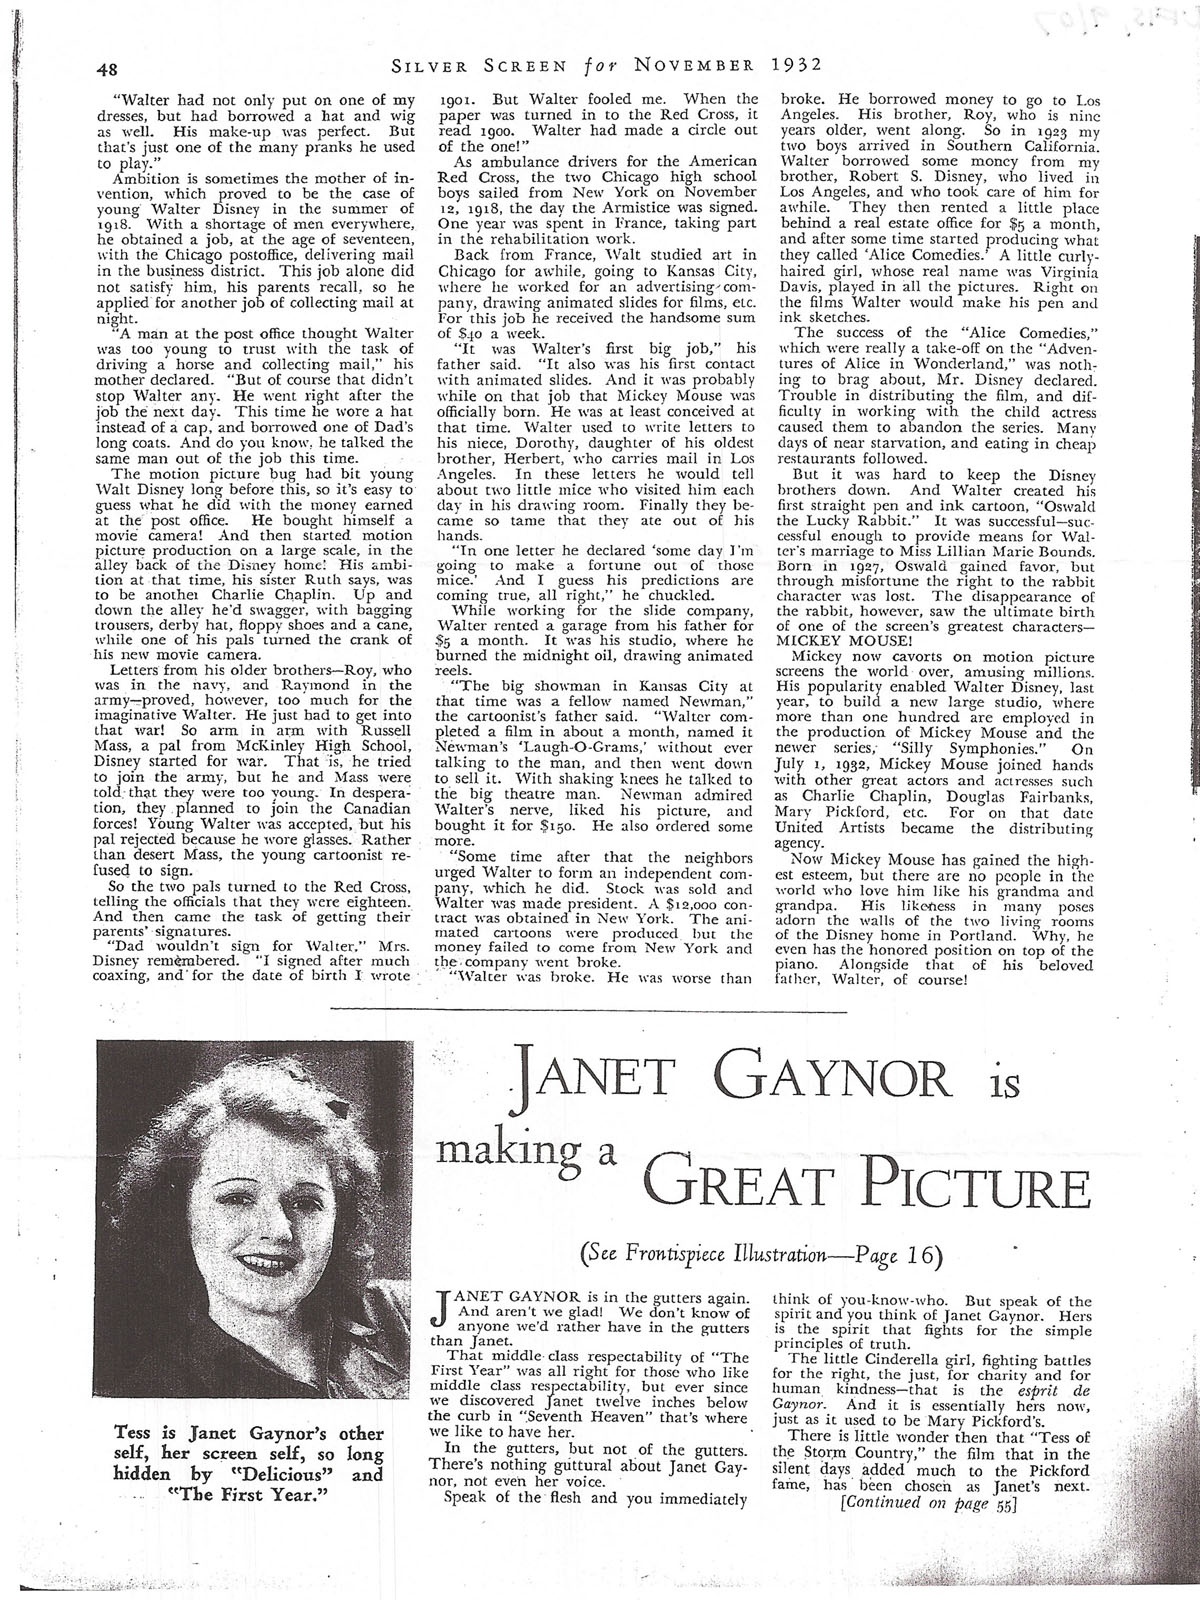 Silver Screen article, page 3